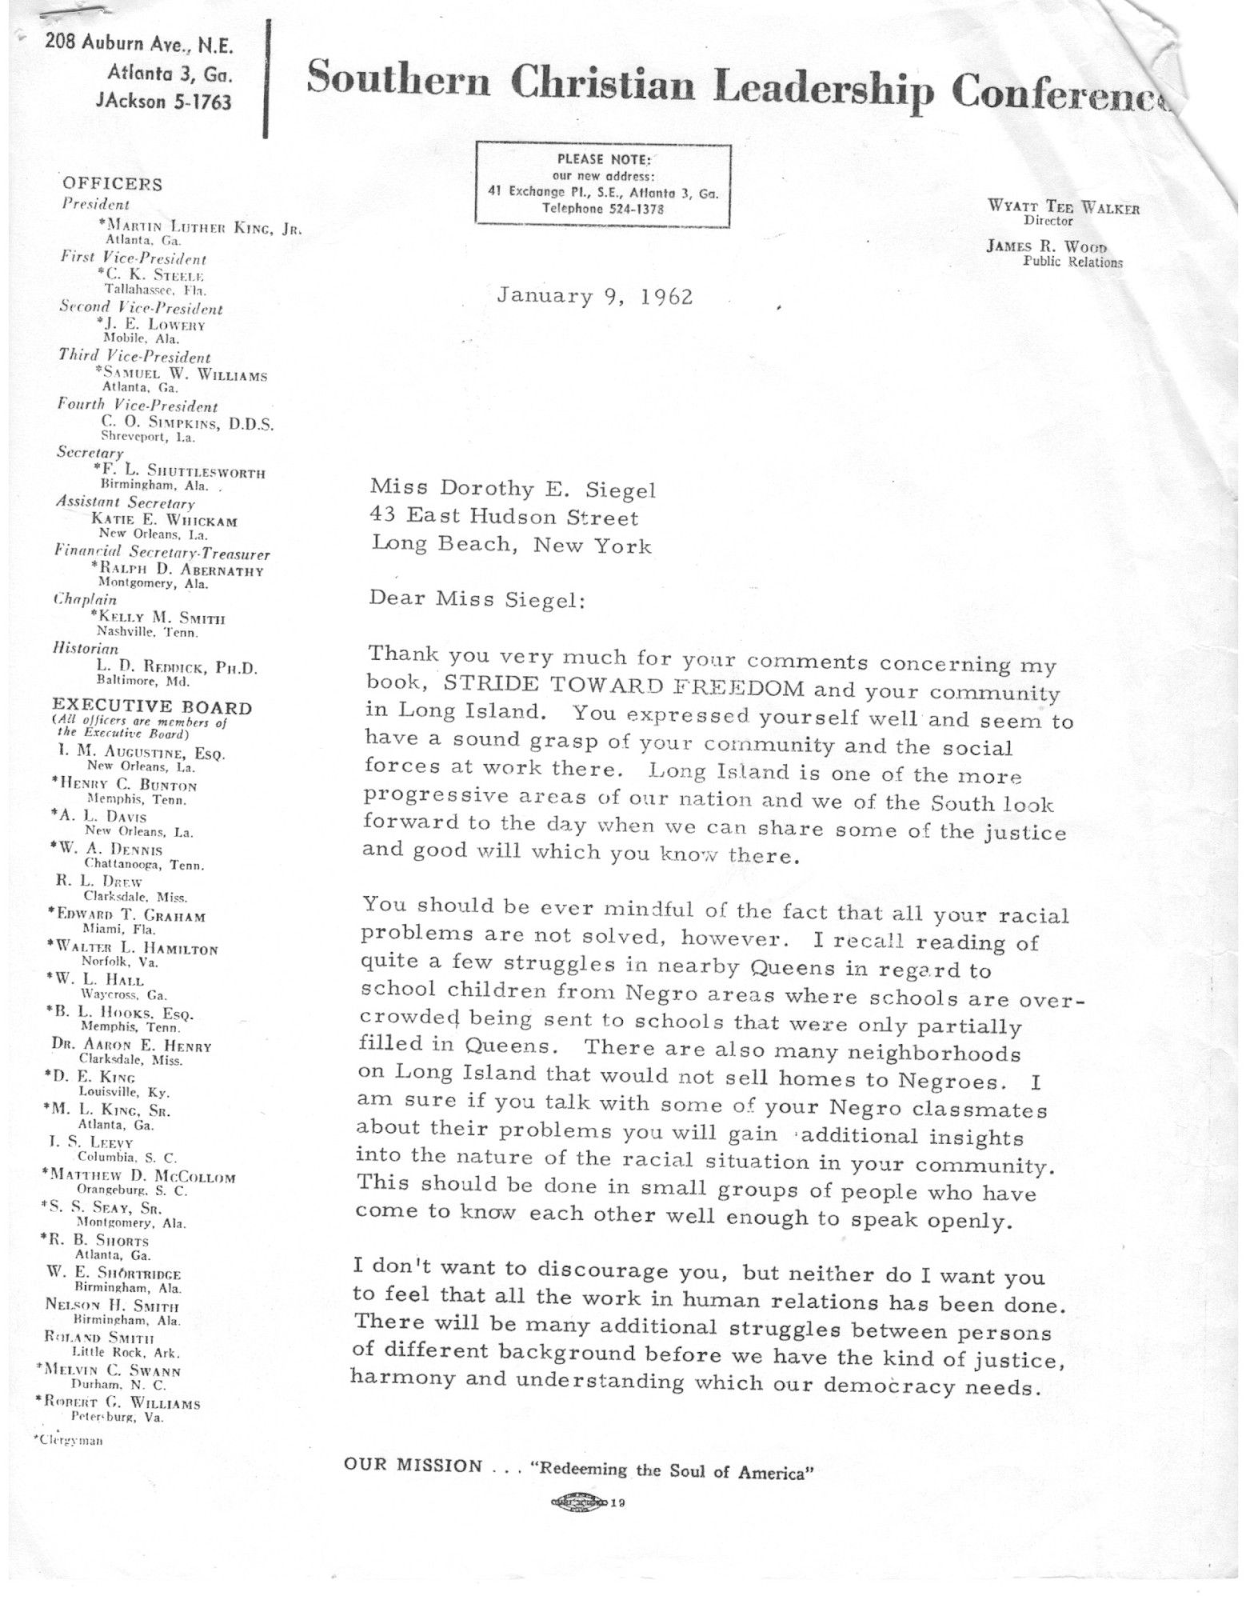 From: Rev. Dr. Martin Luther King Jr.. Jan 9th, 1962.Dear Miss Siegel: Thank you very much for your comments concerning my book, STRIDE TOWARD FREEDOM and your community in Long Island. You expressed yourself well and seem to have a sound grasp of your community and the social forces at work there. Long Island is one of the more progressive areas of our nation and we of the South look forward to the day when we can share some of the justice and good will which you know there. You should be ever mindful of the fact that all your racial problems are not solved, however. I recall reading of quite a few struggles in nearby Queens in regard to school children from Negro areas where schools are over- crowded being sent to schools that were only partially filled in Queens. There are also many neighborhoods on Long Island that would not sell homes to Negroes. I am sure if you talk with some of your Negro classmates about their problems you will gain additional insights into the nature of the racial situation in your community. This should be done in small groups of people who have come to know each other well enough to speak openly. I don't want to discourage you, but neither do I want you to feel that all the work in human relations has been done. There will be many additional struggles between persons of different background before we have the kind of justice, harmony and understanding which our democracy needs.